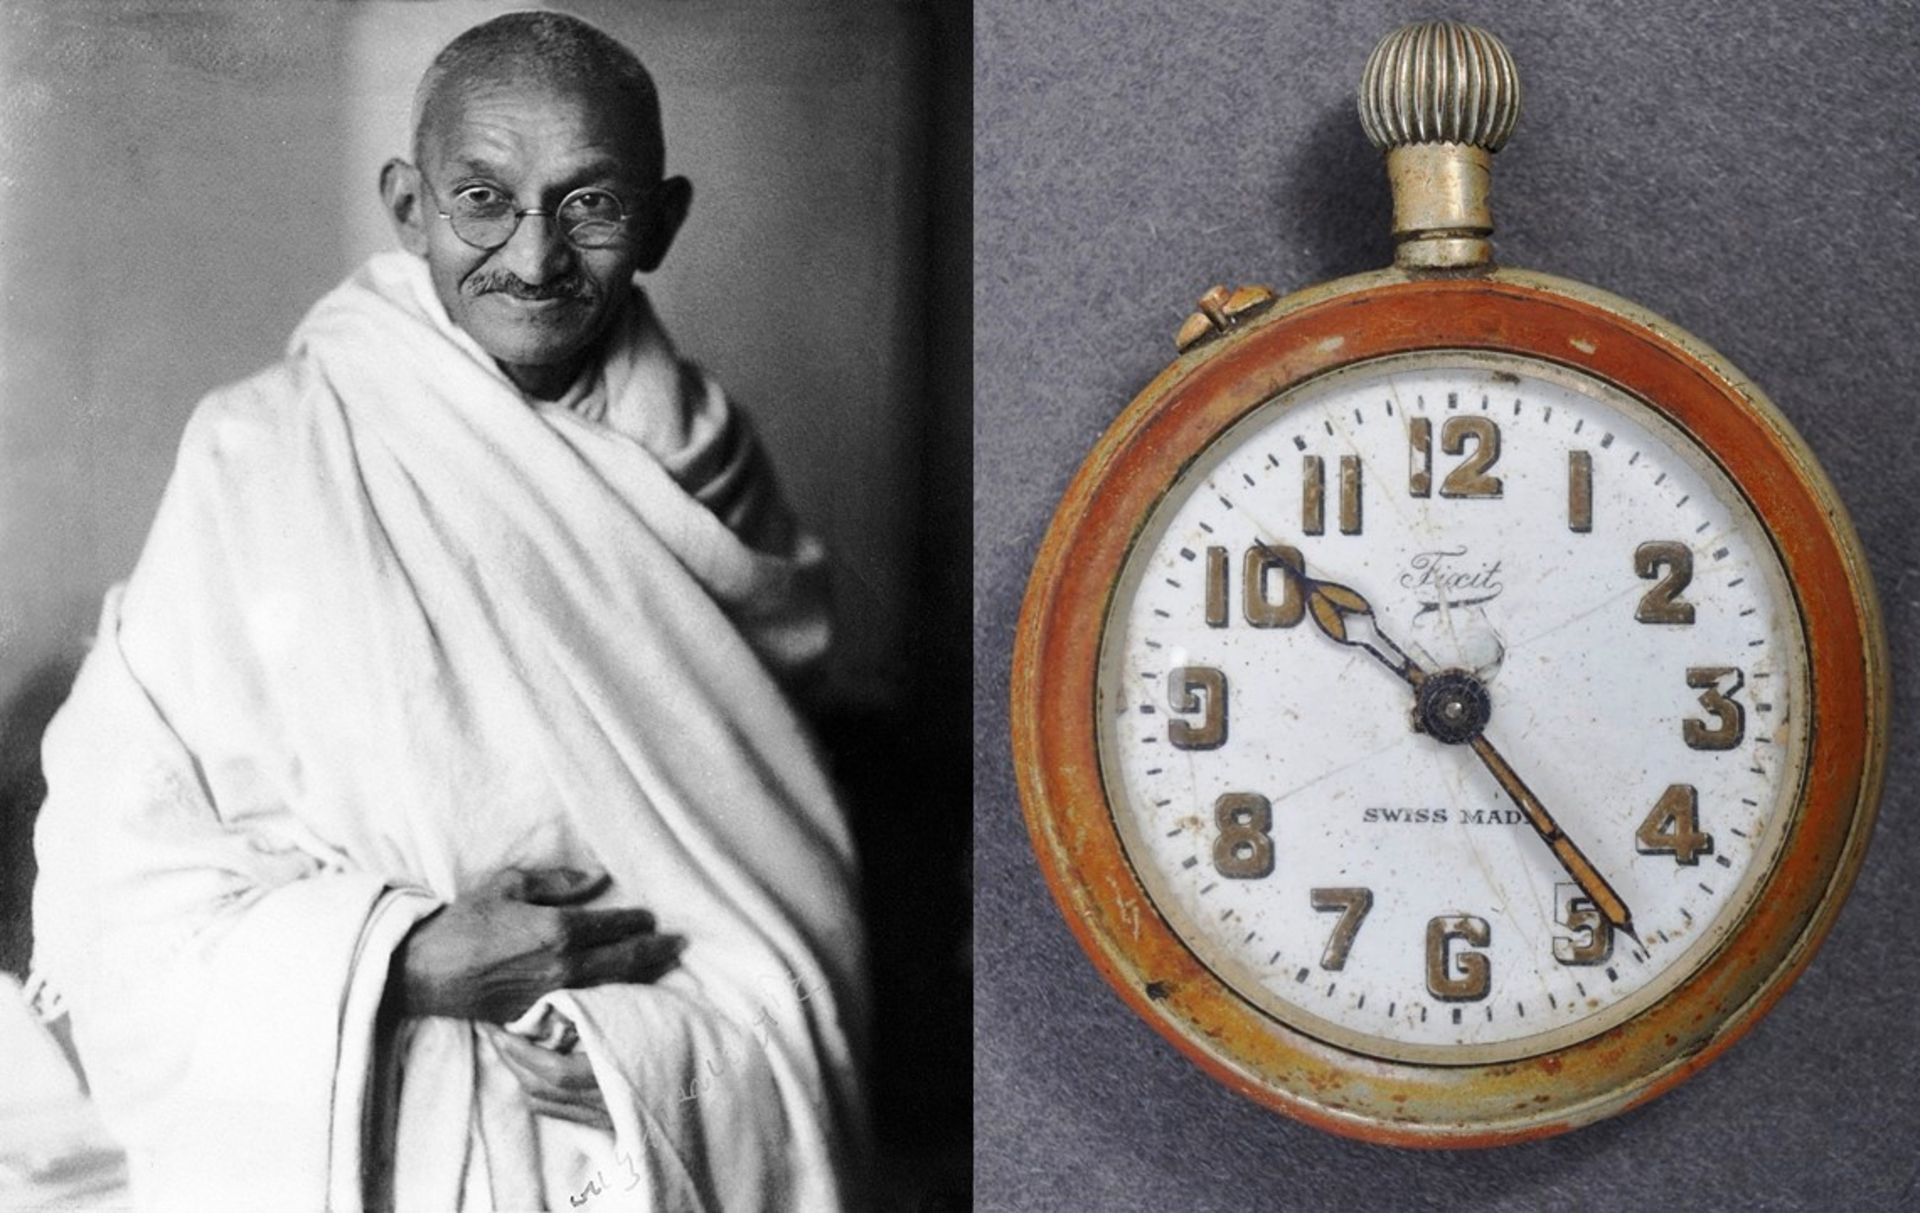 MAHATMA GANDHI - SILVER PLATE POCKET WATCH GIFTED FROM GANDHI